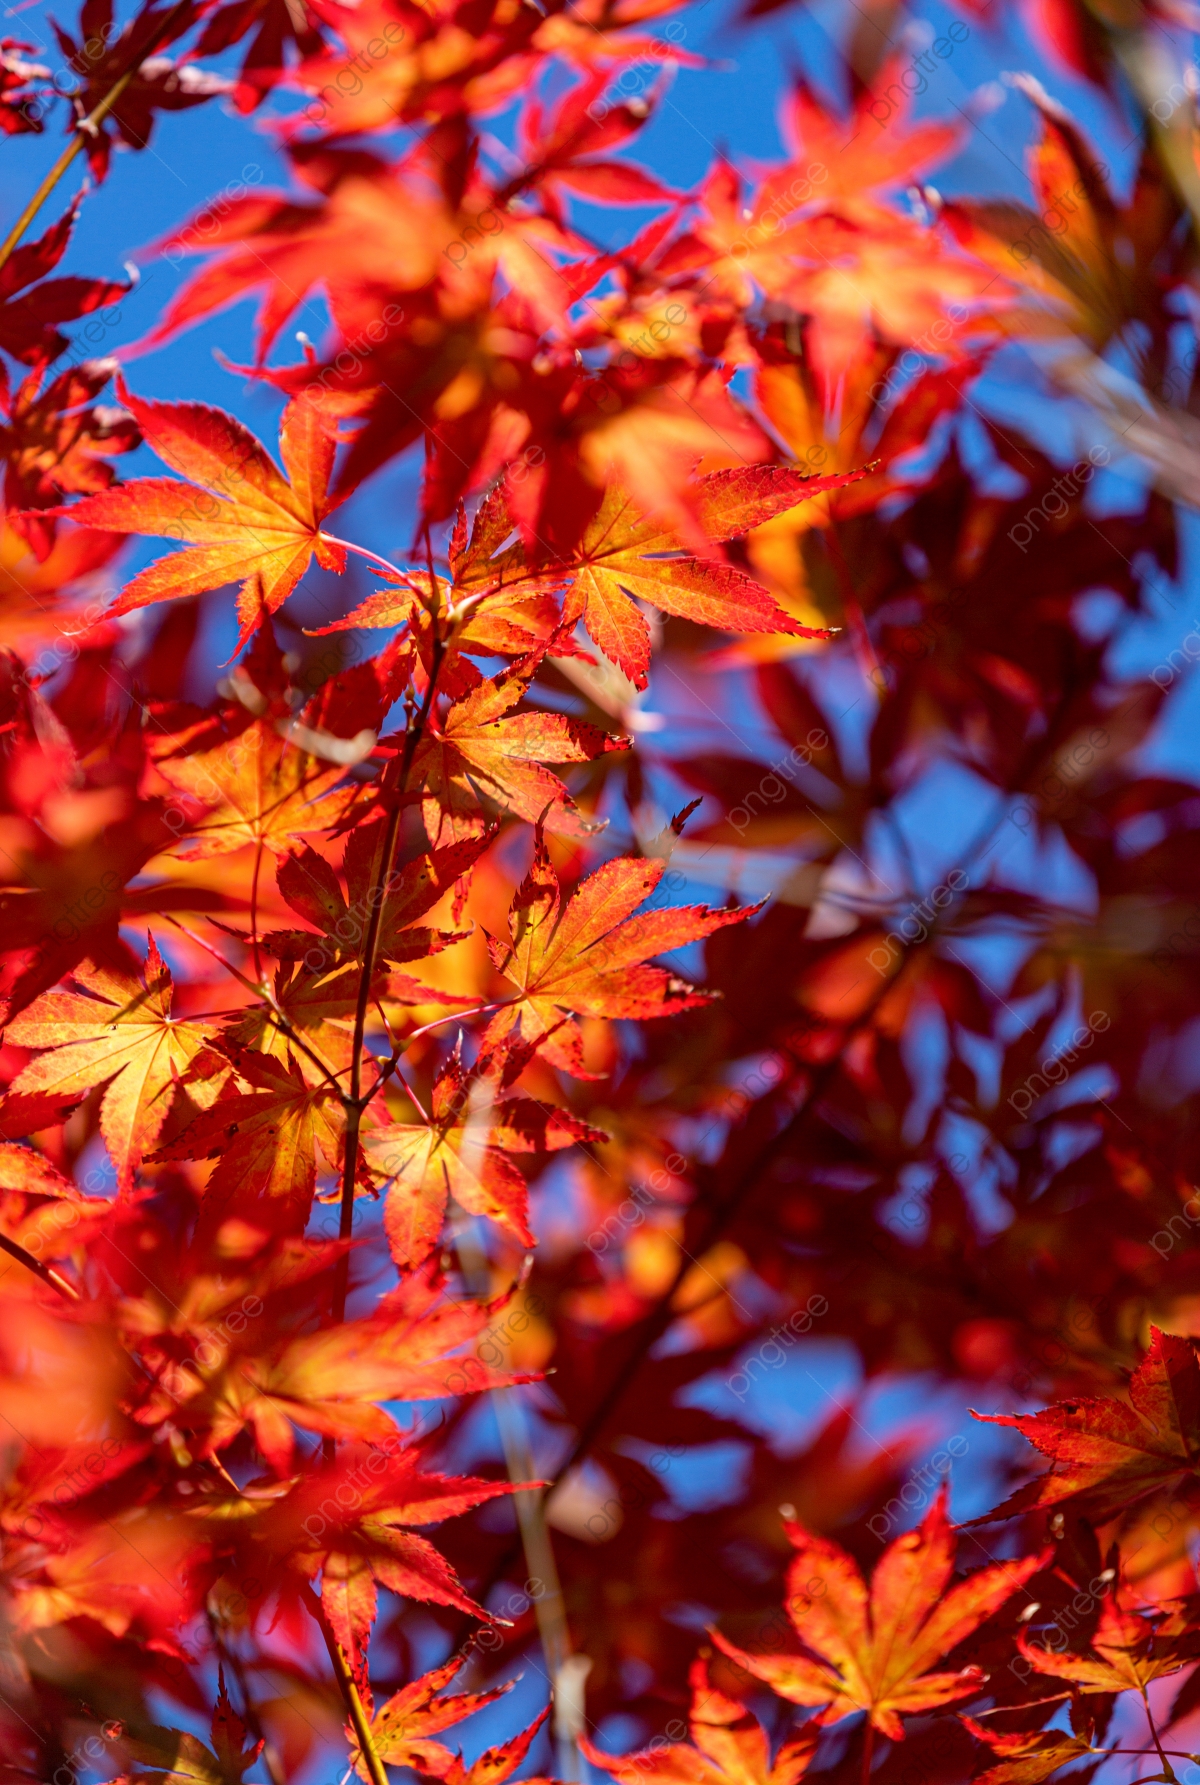 Maple Leaf Autumn Autumnal Equinox Background, Fall, Leaves, Red Leaves Background Image for Free Download